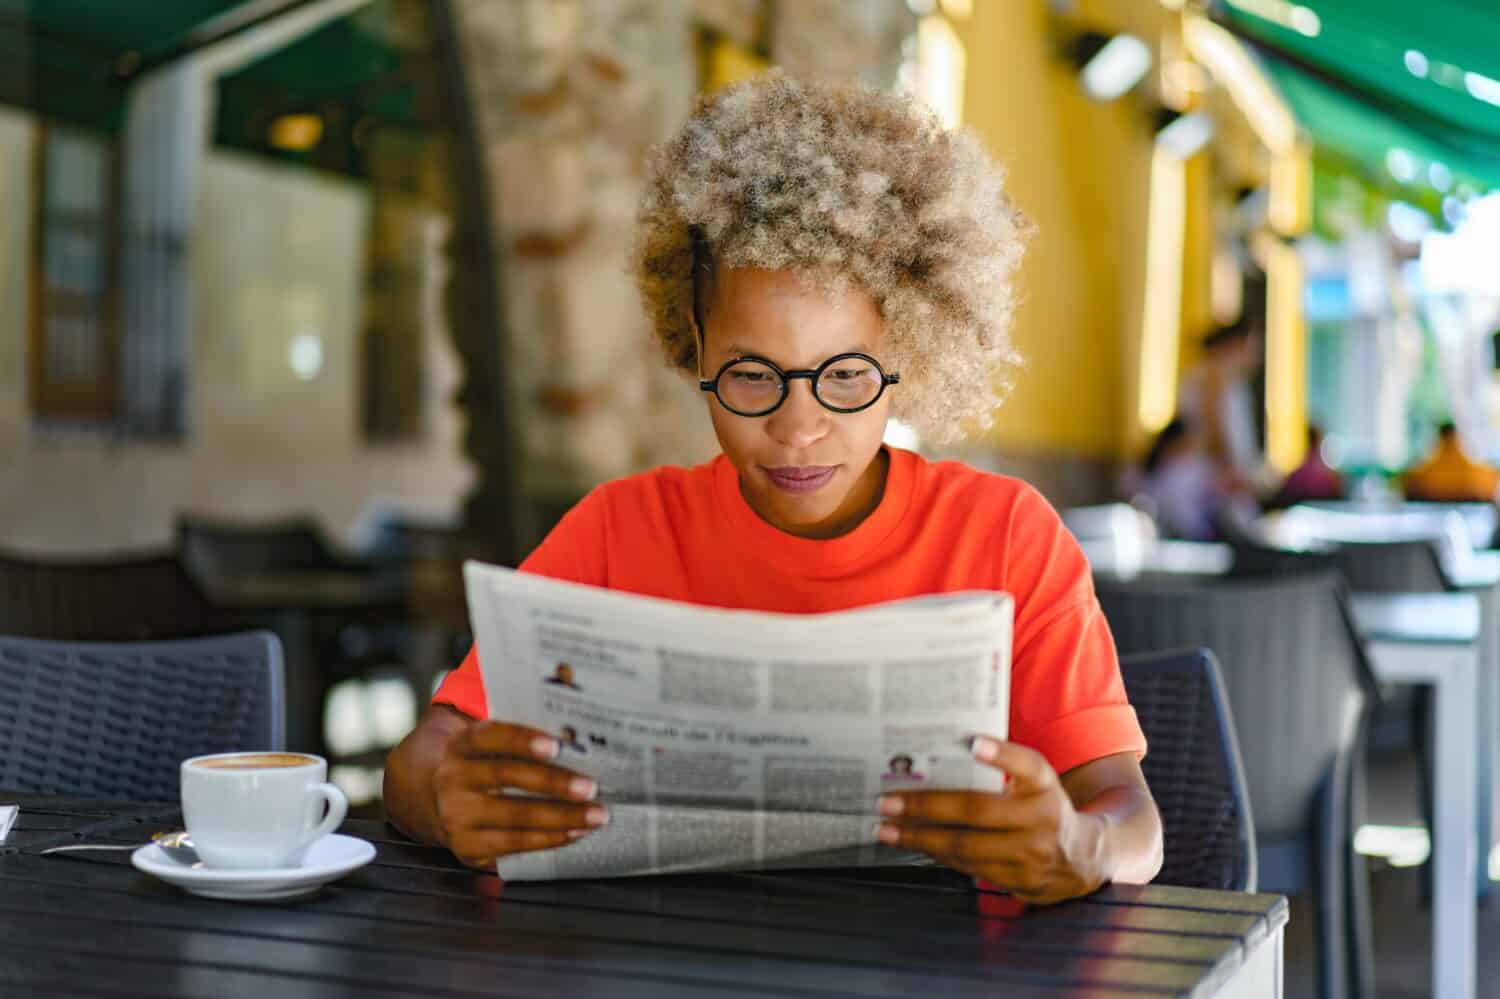 Woman drinking coffee and reading newspaper at cafe. Leisure and news concept